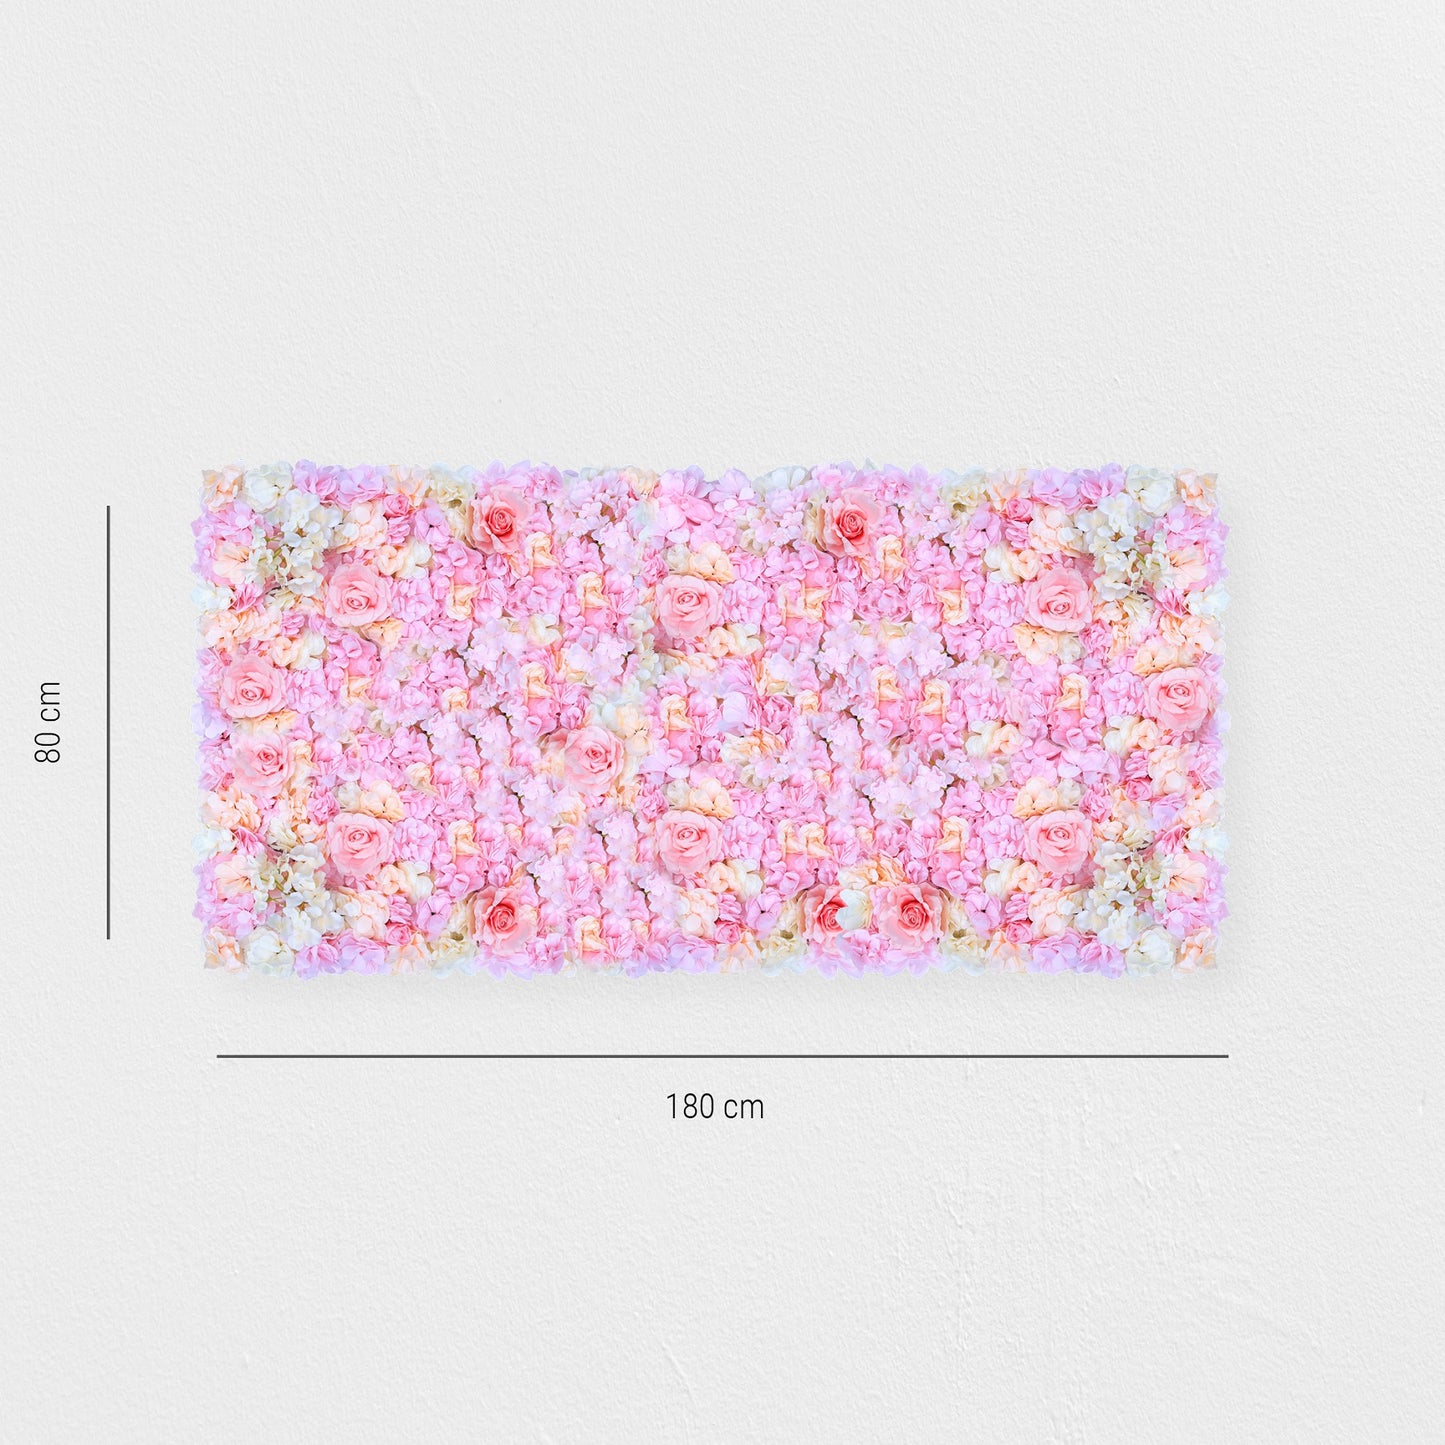 Flower wall "CREAMY CUPCAKE" made of Realtouch artificial plants